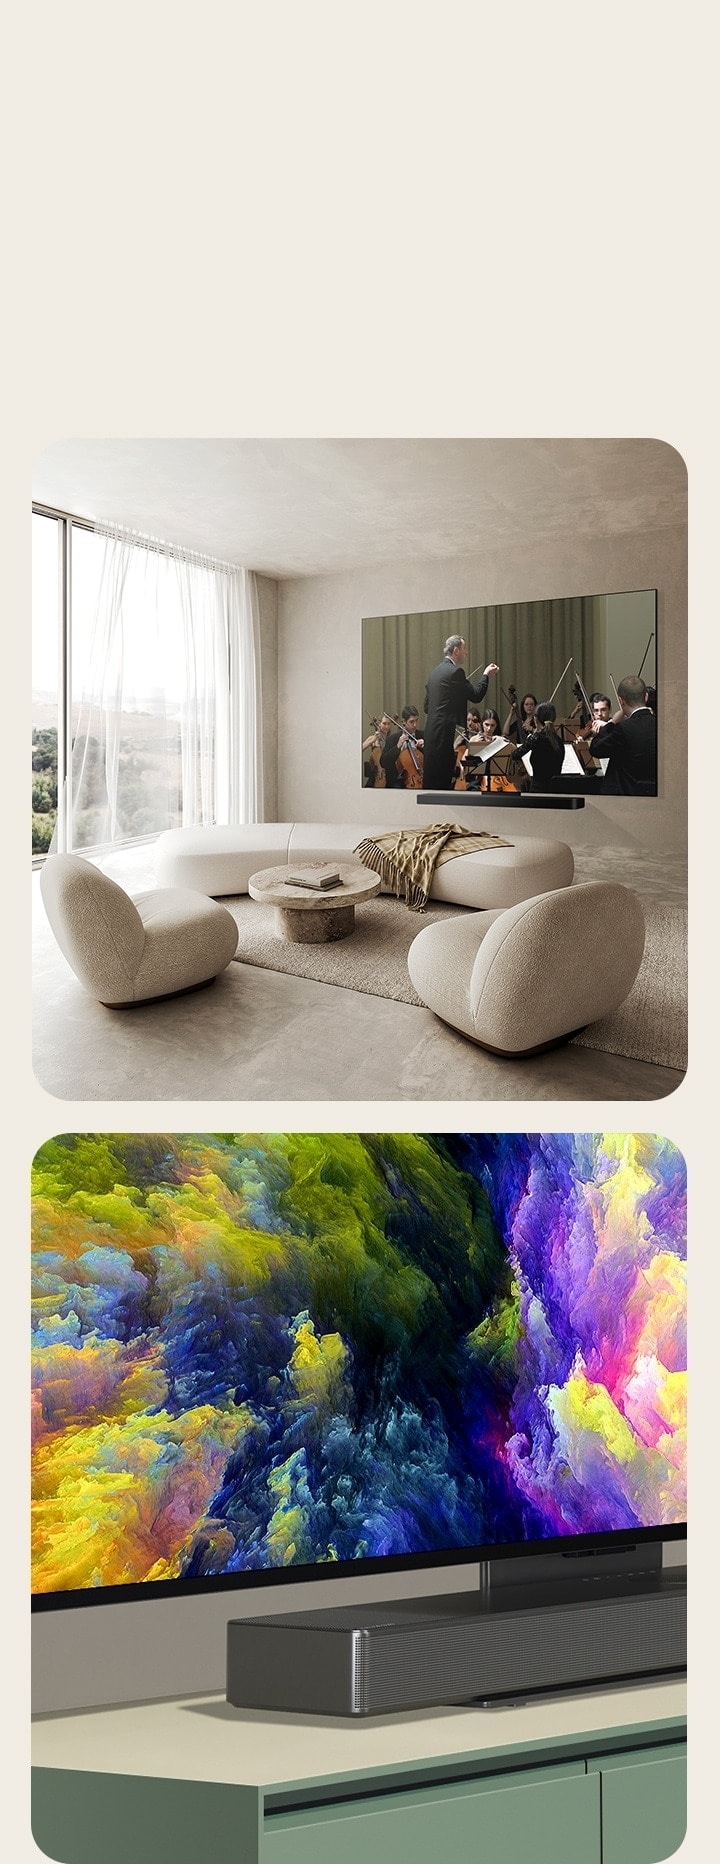 An angled view of the bottom corner of LG OLED C4 showing an absrtact artwork of a forest on the screen. The TV is attached to an LG Soundbar via the Synergy bracket and has an abstract artwork of a forest on screen.  An image of LG OLED C4 and an LG Soundbar in a clean living space flat against the wall with an orchestral performance playing on screen. 